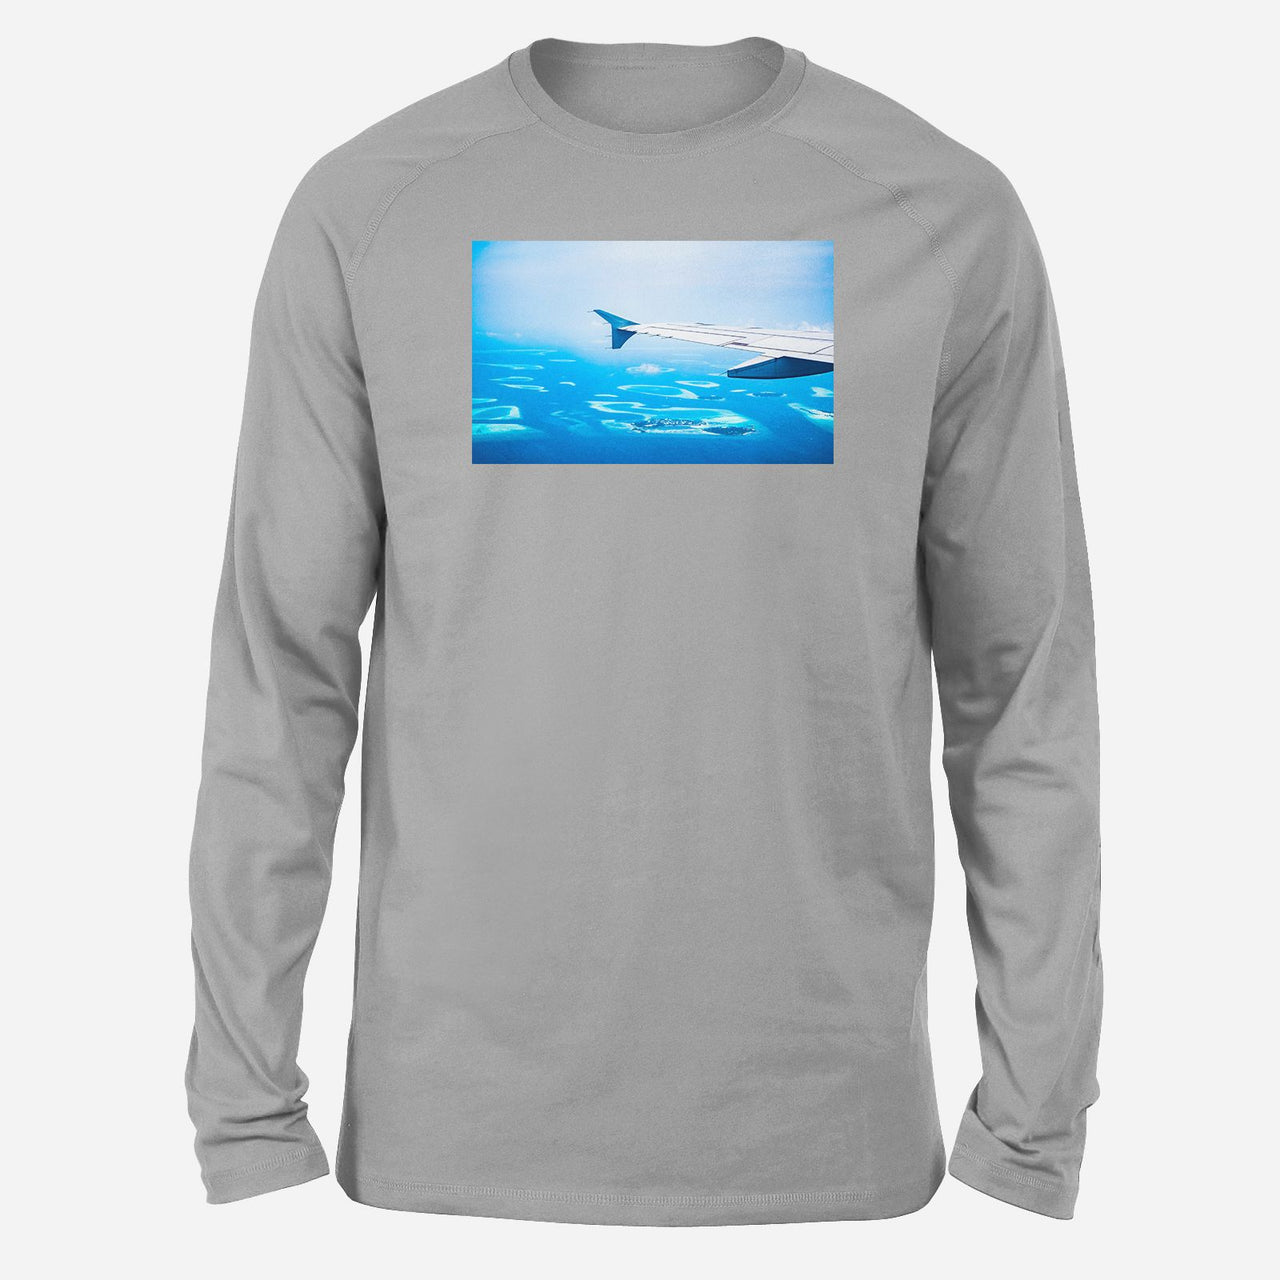 Outstanding View Through Airplane Wing Designed Long-Sleeve T-Shirts